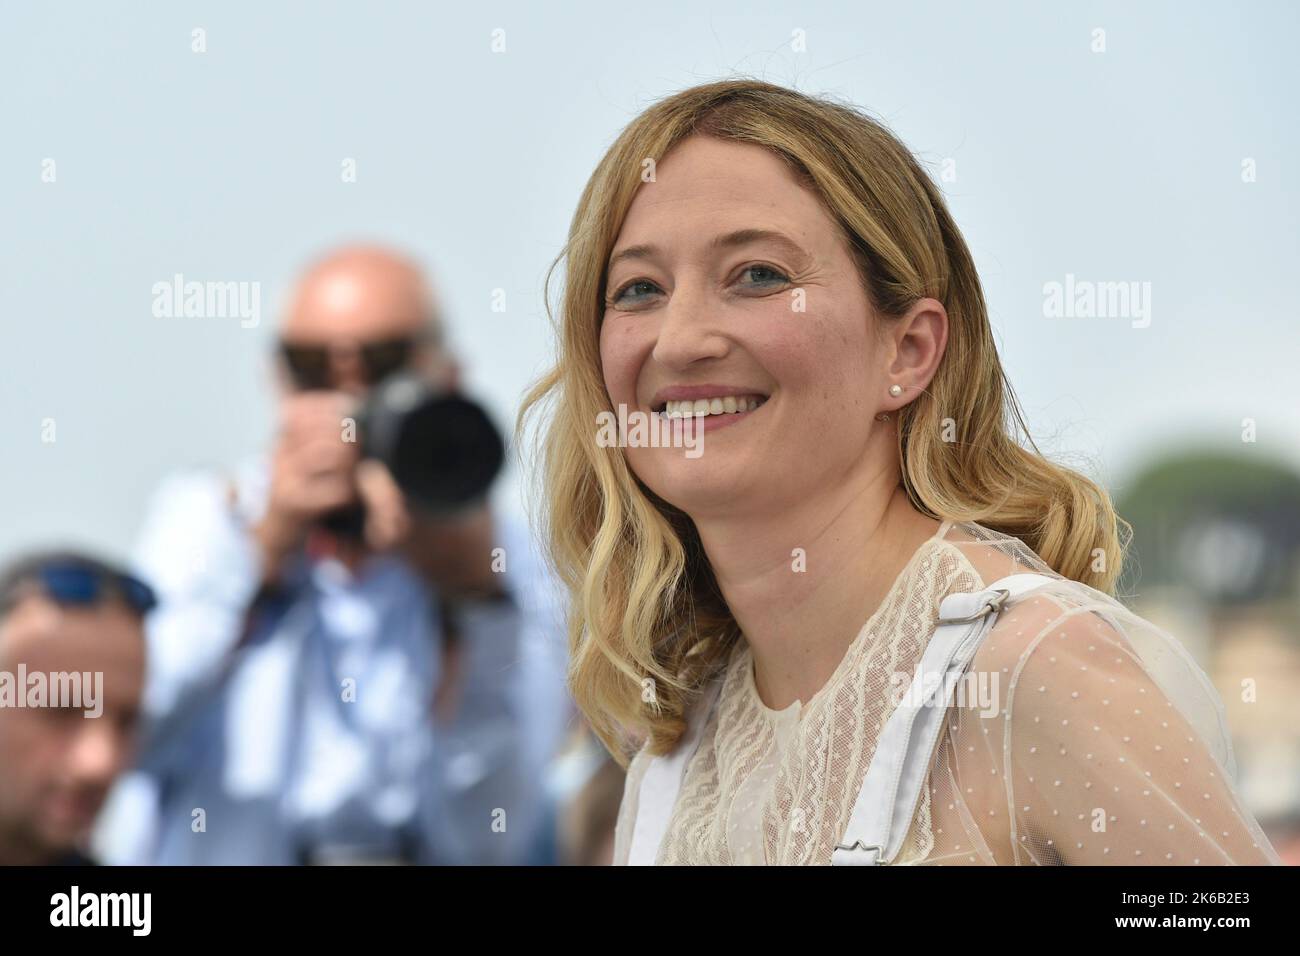 Actress Alba Rohrwacher posing during the photocall of the film “Marcel !” on the occasion of the Cannes Film Festival on May 22, 2022 Stock Photo